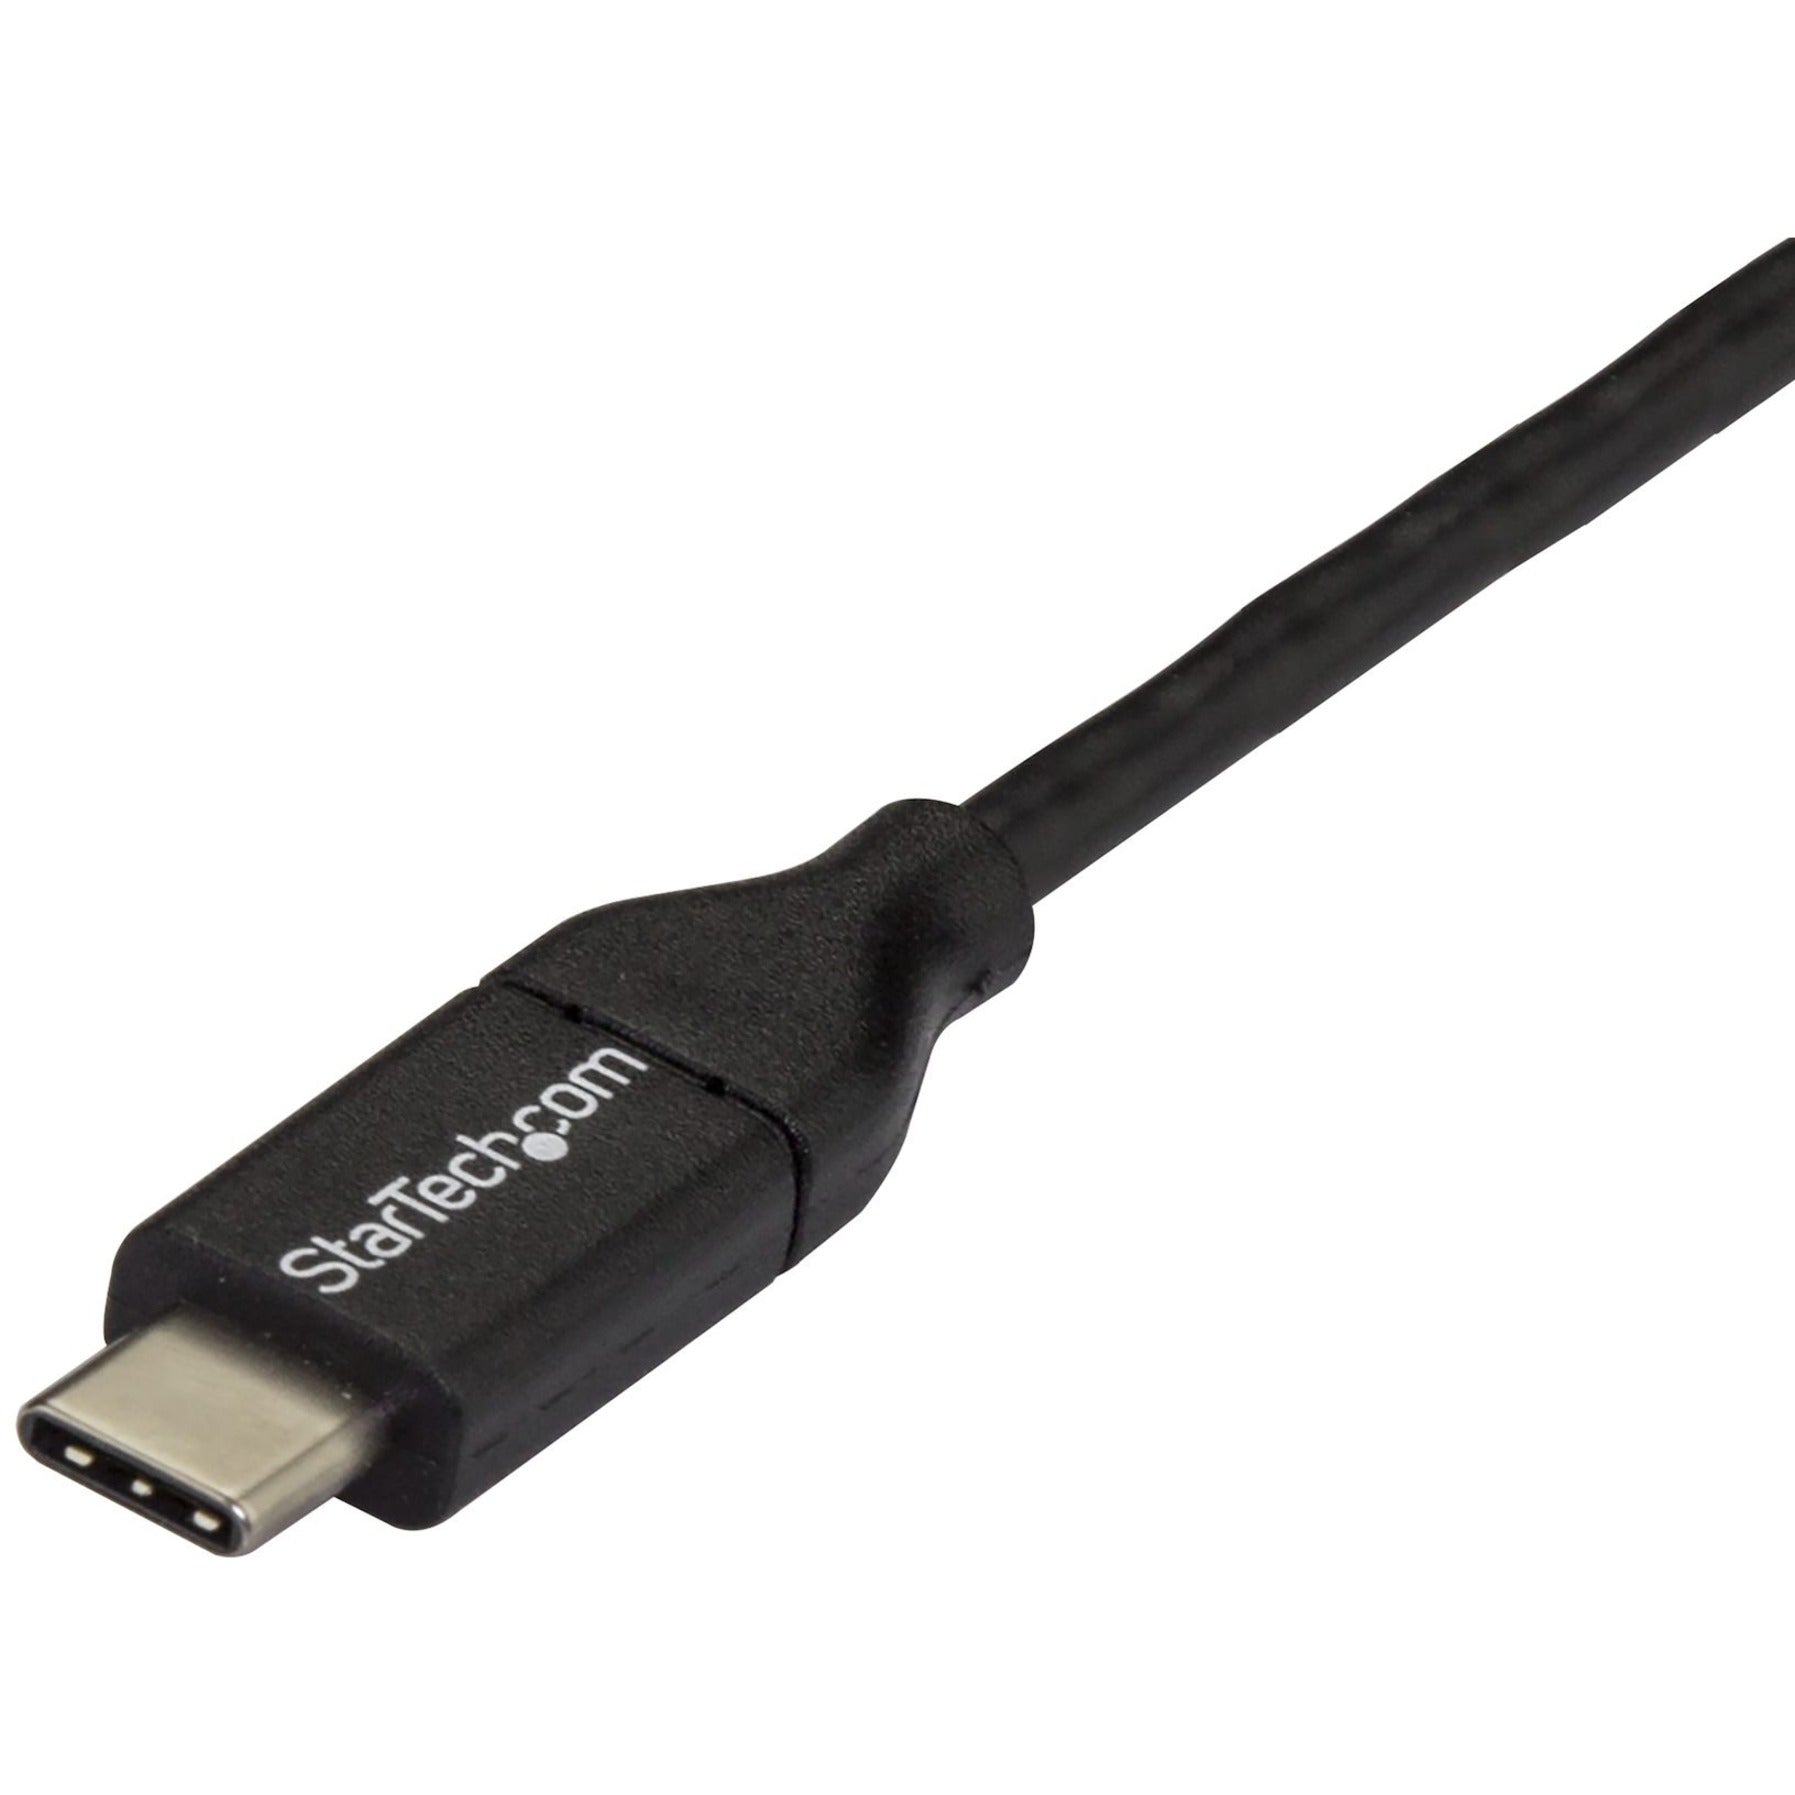 StarTech.com USB2CC3M USB-C to USB-C Cable - M/M - 3m (10 ft.), USB 2.0 Charge Cable